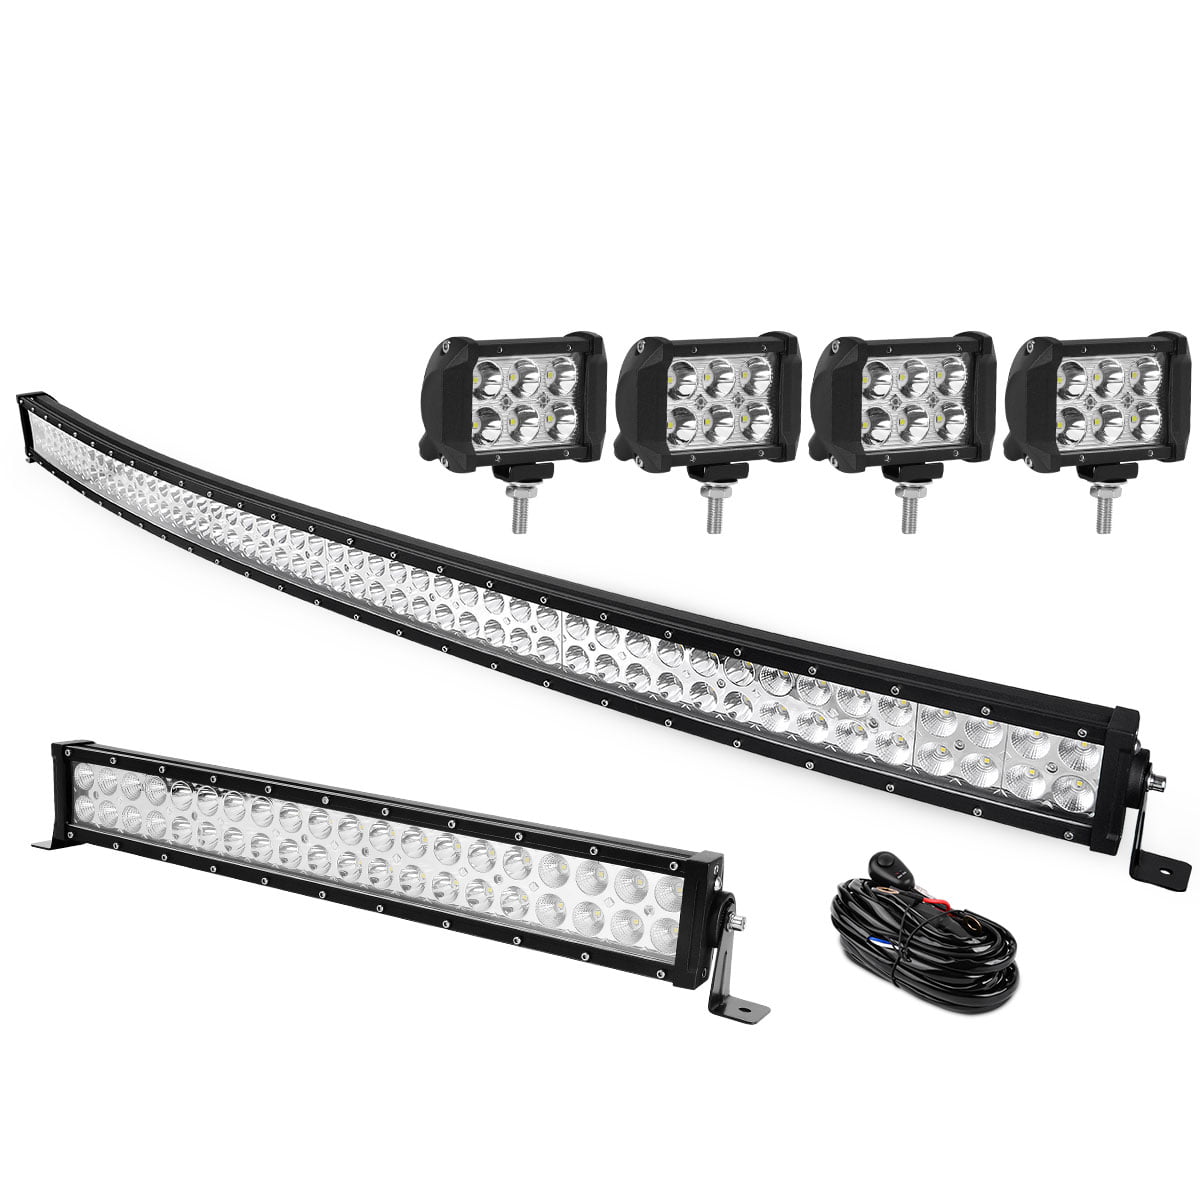 4PCS 22" inch Curved 120W LED Work Light Bar Combo Offroad SUV Boat Truck 4x 12V